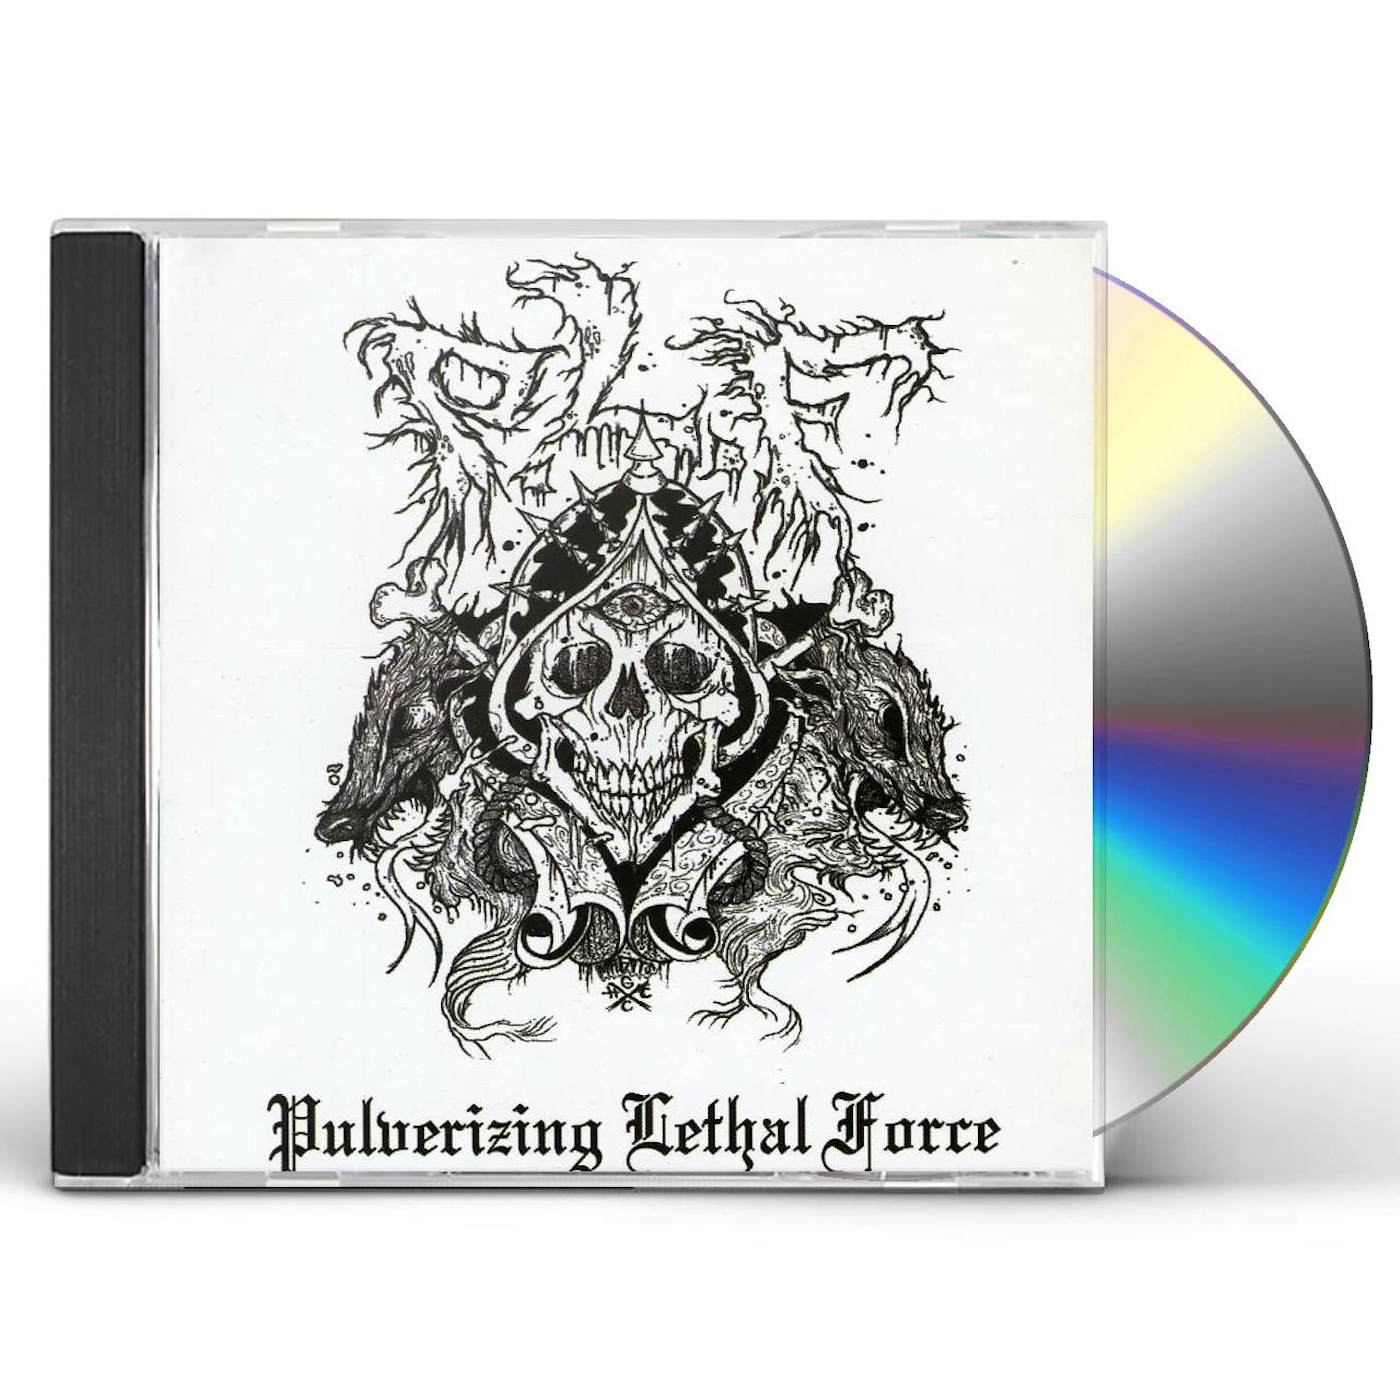 P.L.F. PULVERIZING LETHAL FORCE CD